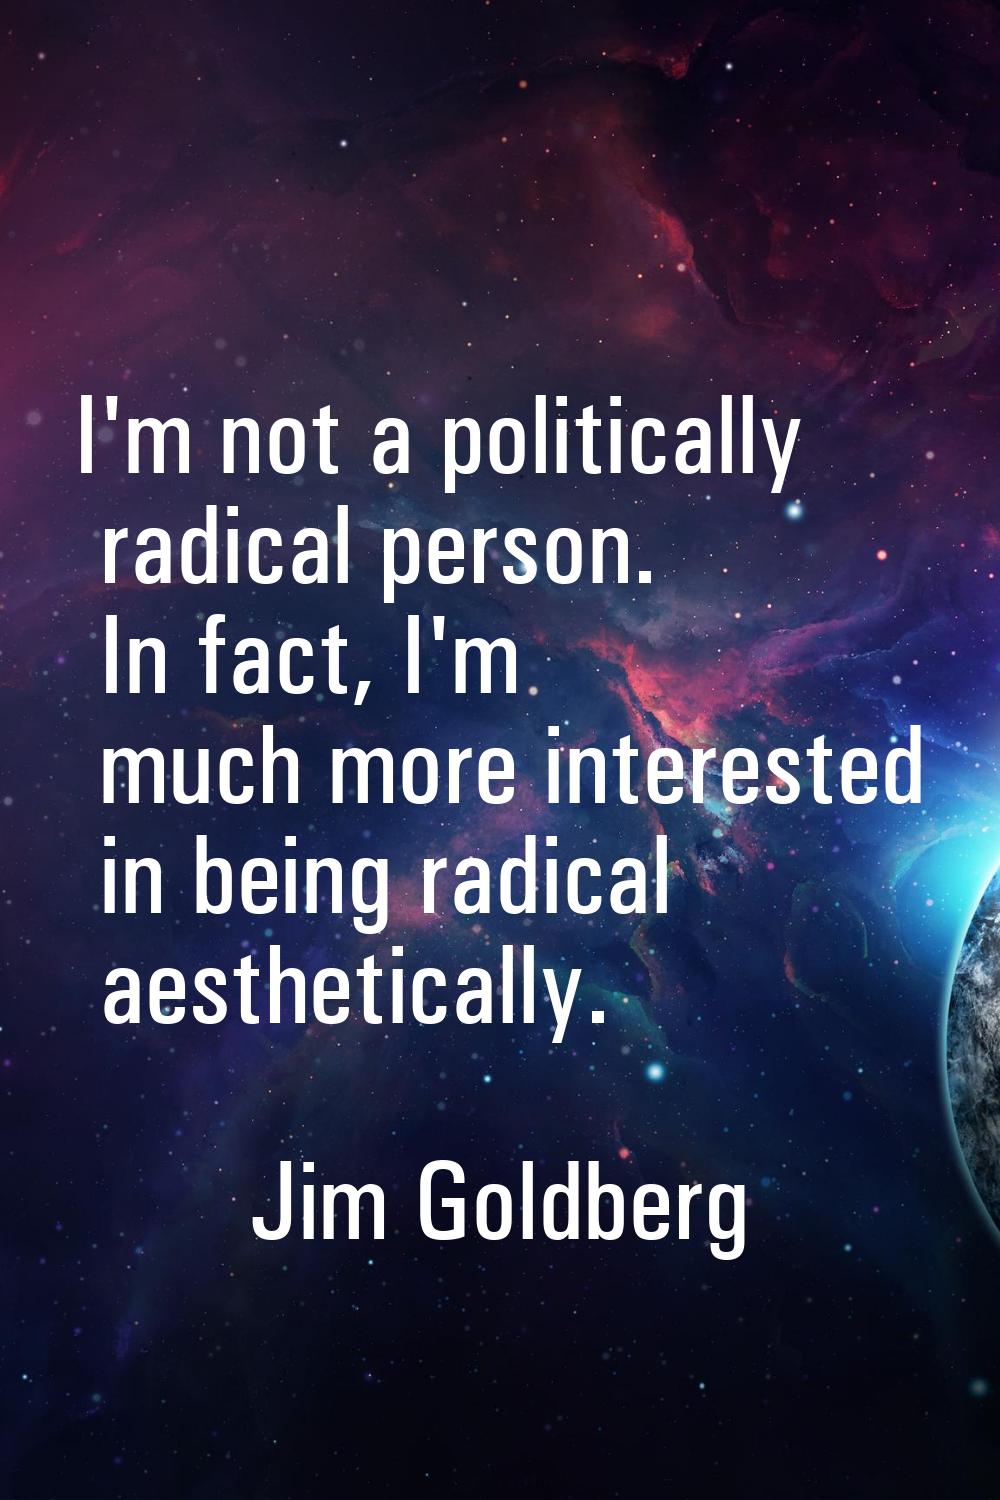 I'm not a politically radical person. In fact, I'm much more interested in being radical aesthetica